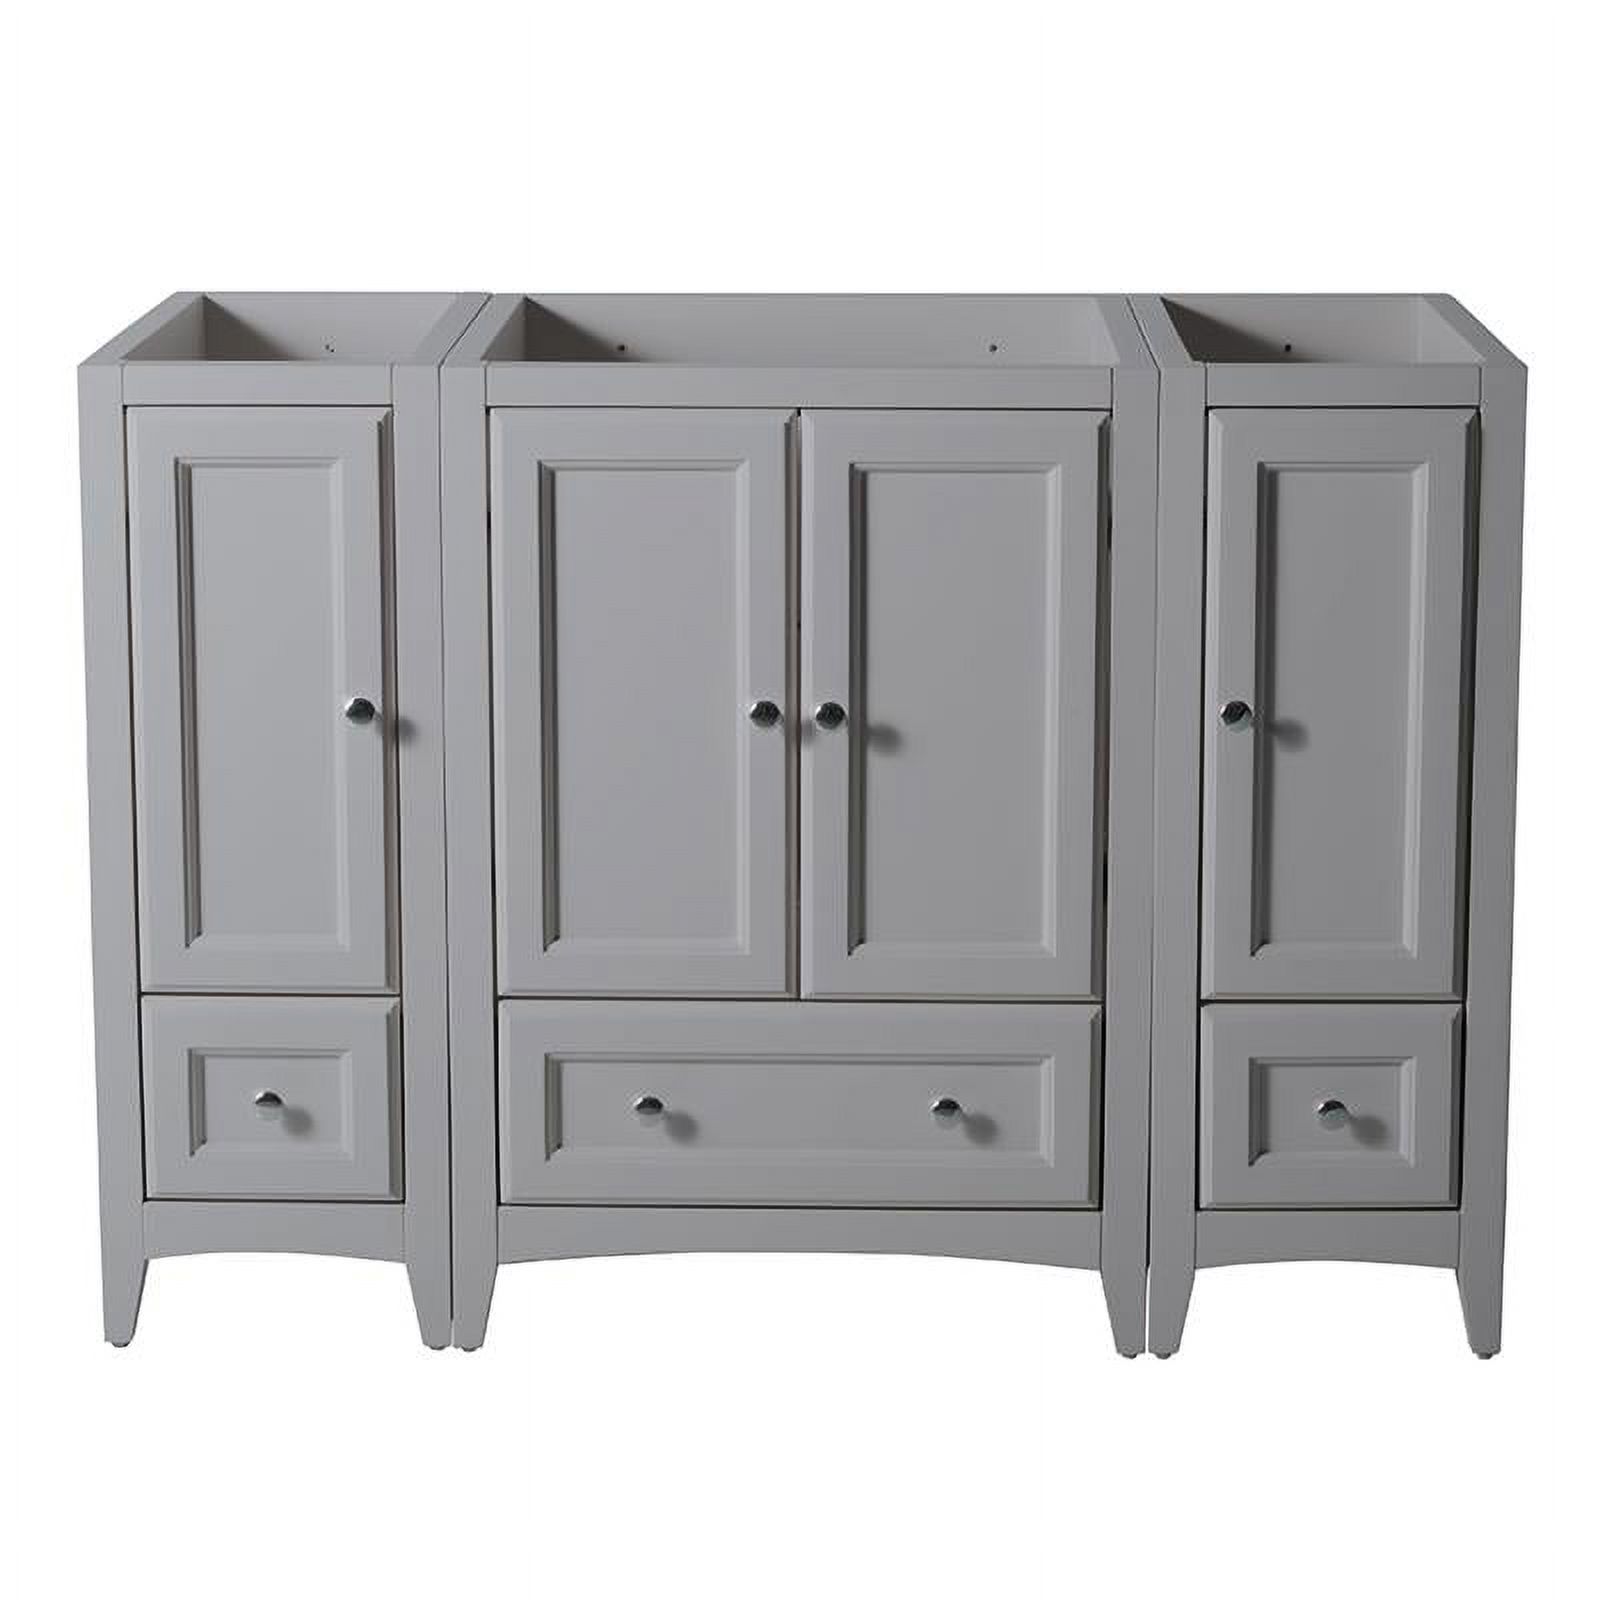 Fresca Oxford 48" 3-drawer Traditional Wood Bathroom Cabinet in Gray - image 2 of 4